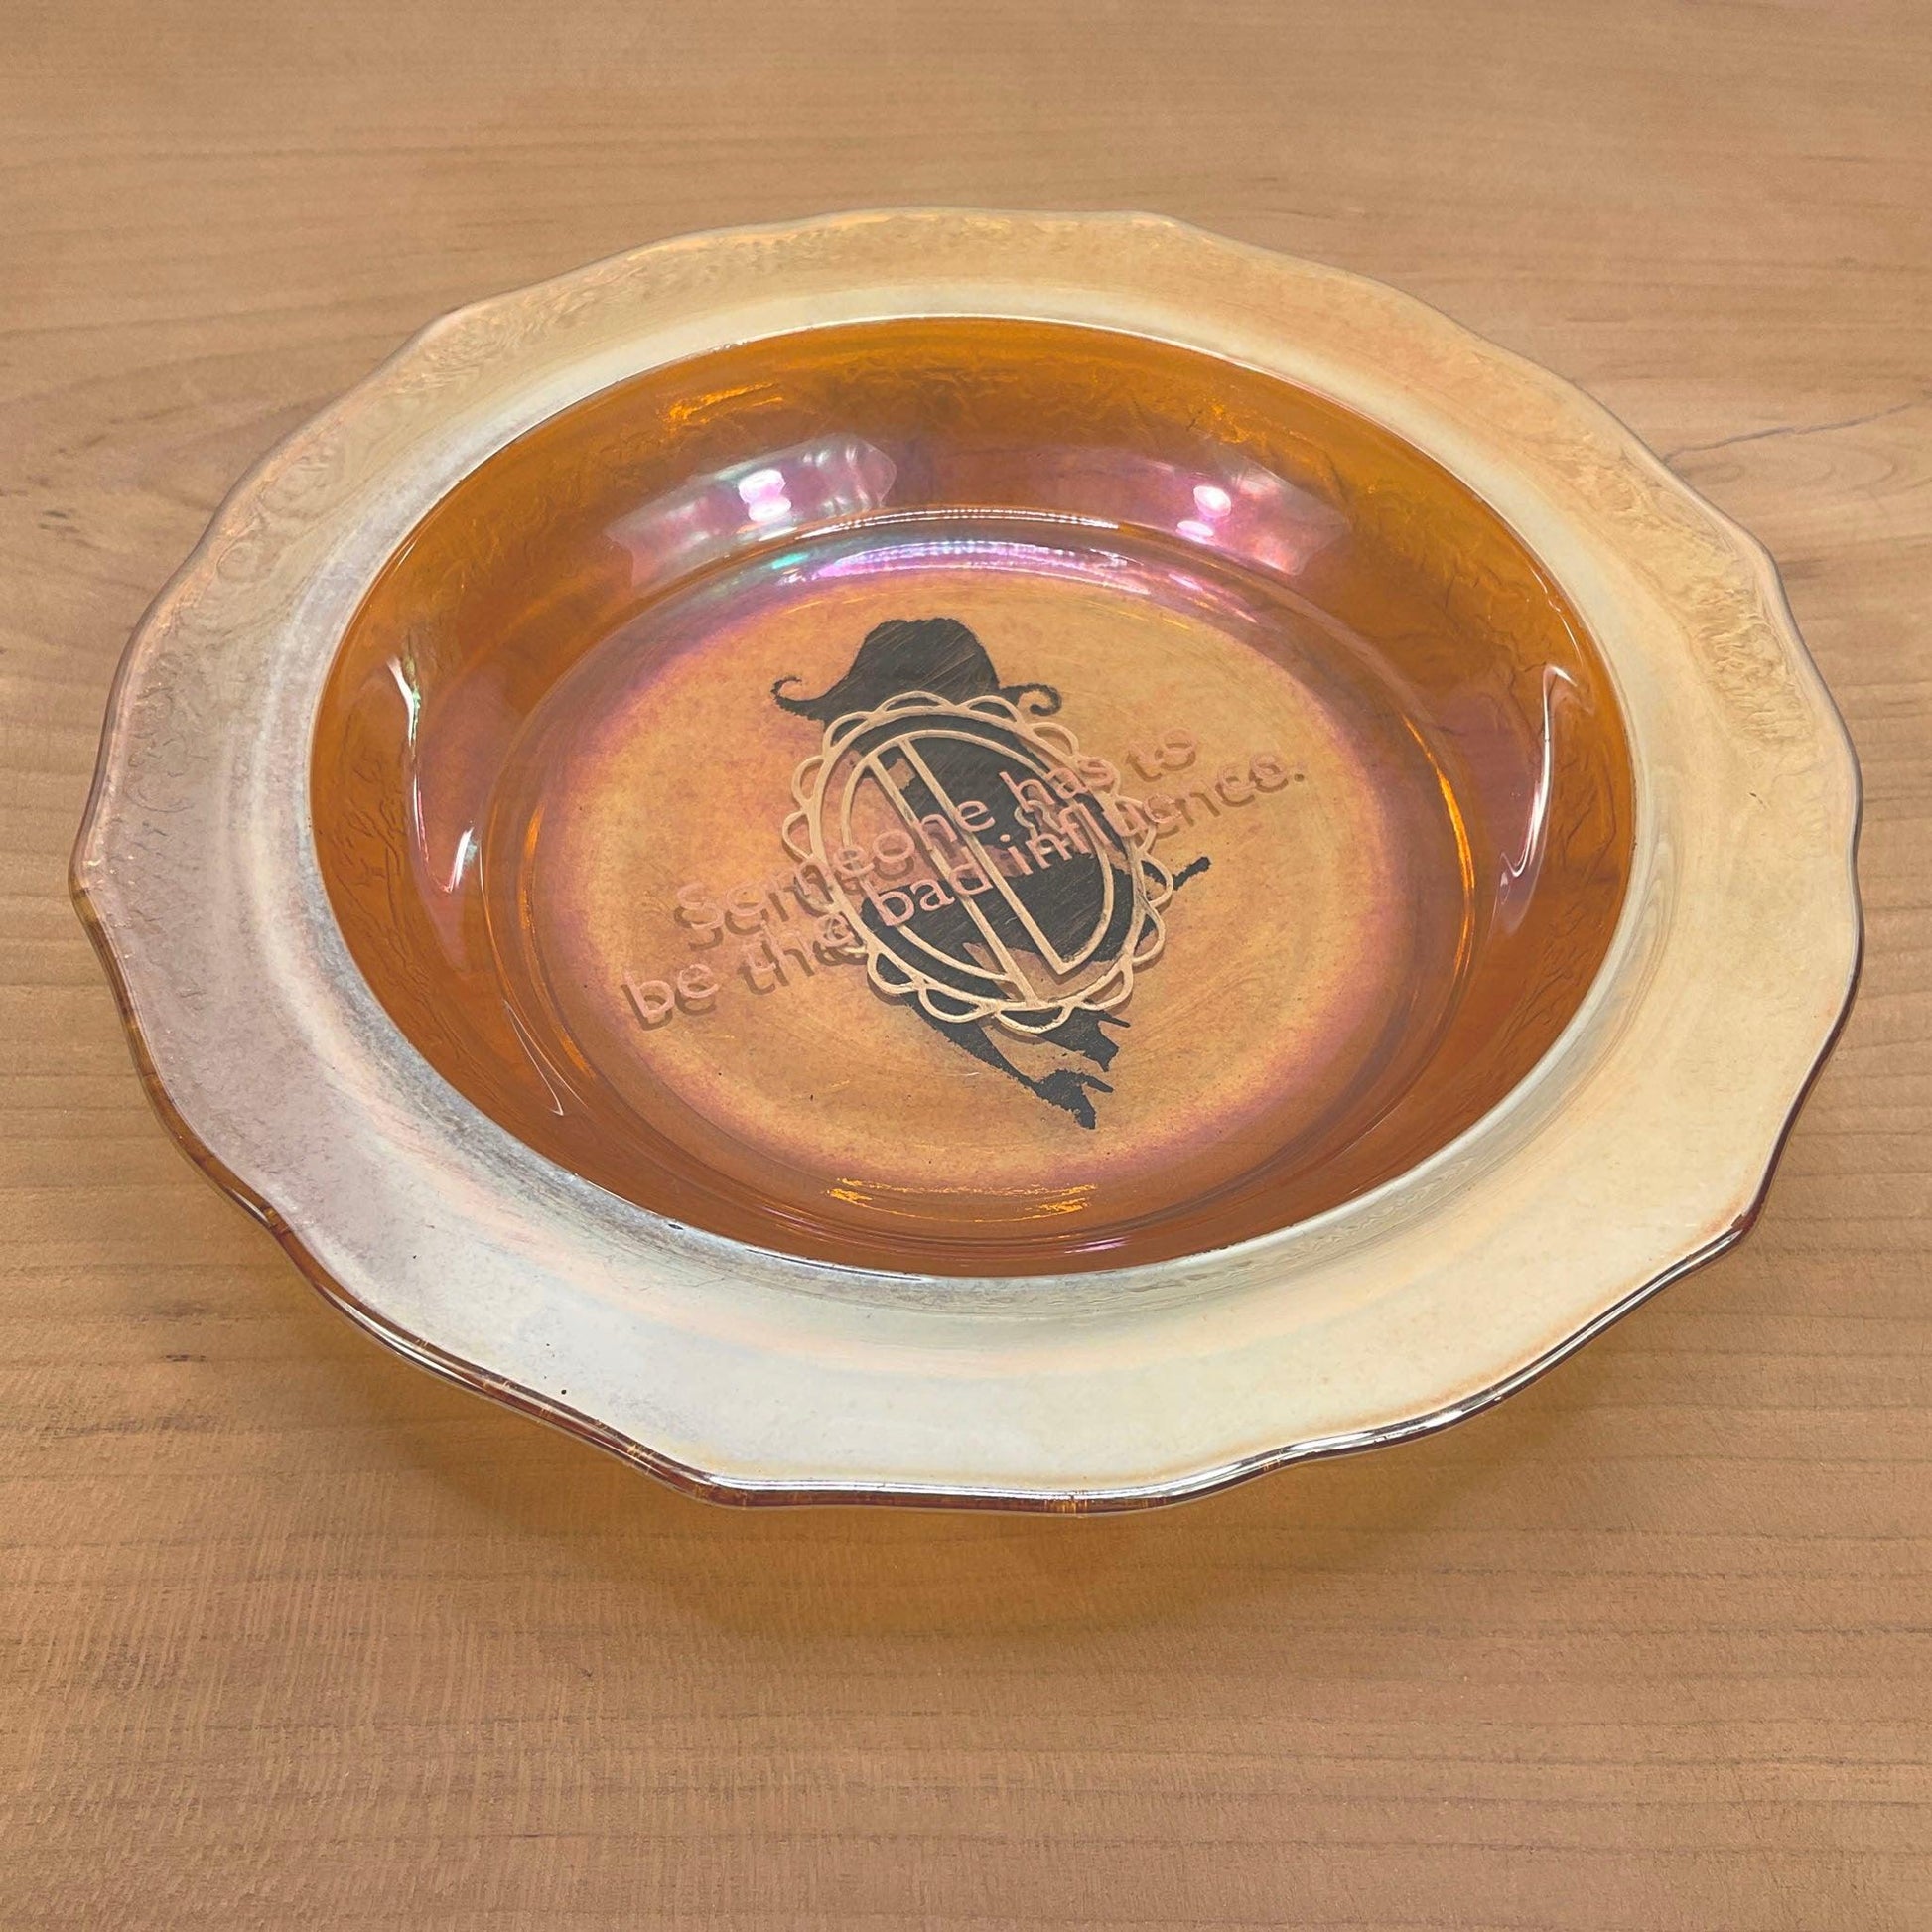 OD Signature Key Bowl - Offensively Domestic